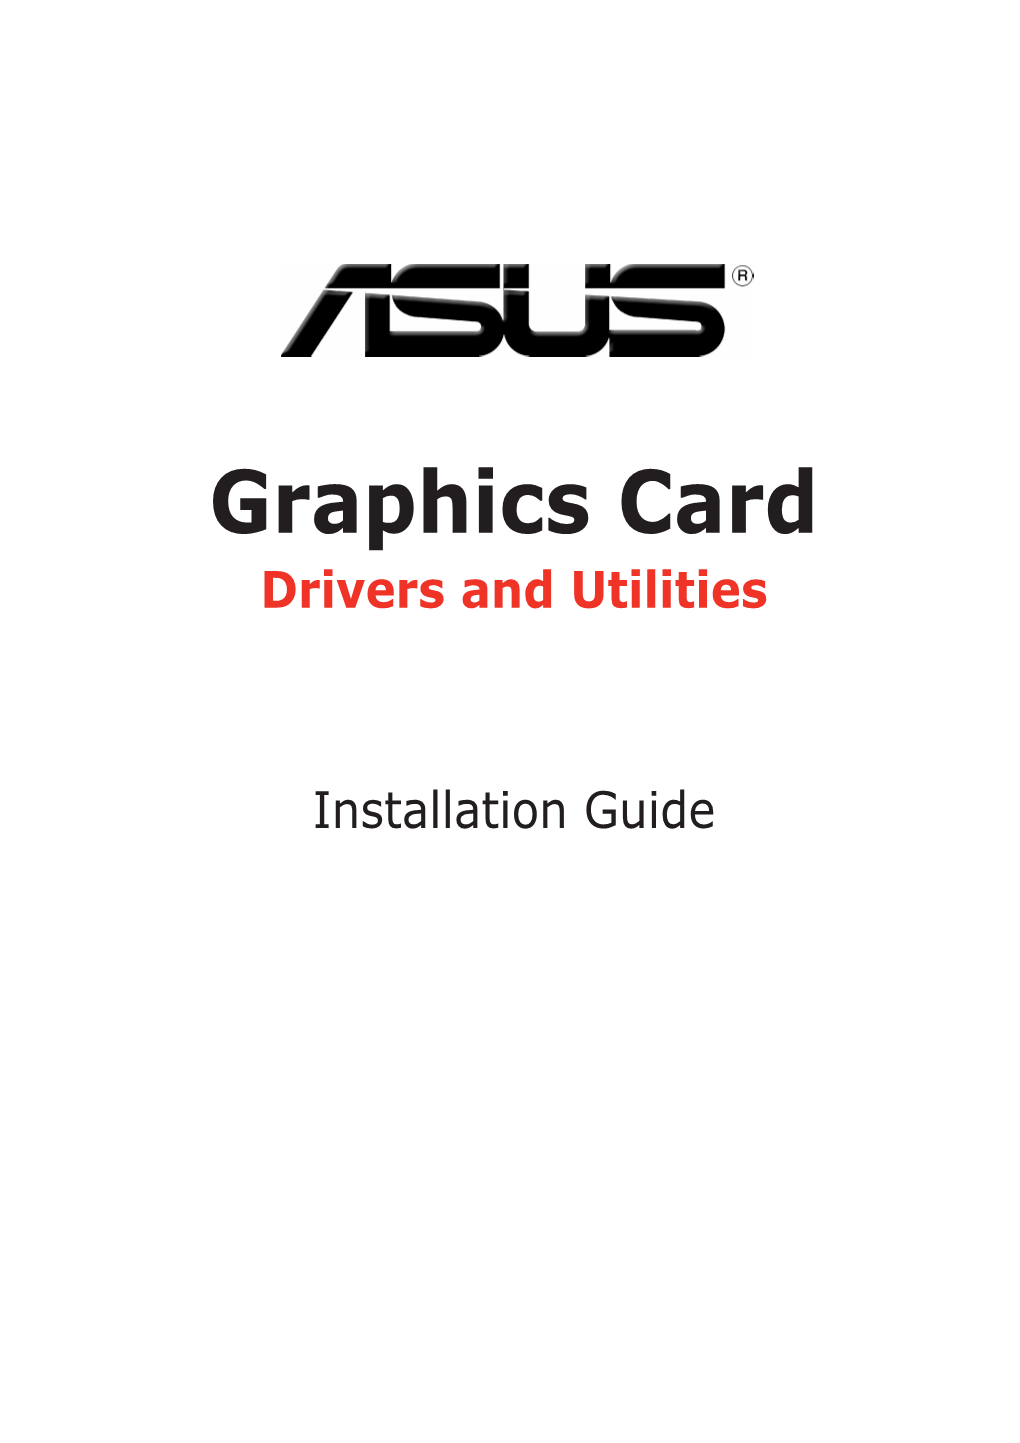 Graphics Card Drivers and Utilities